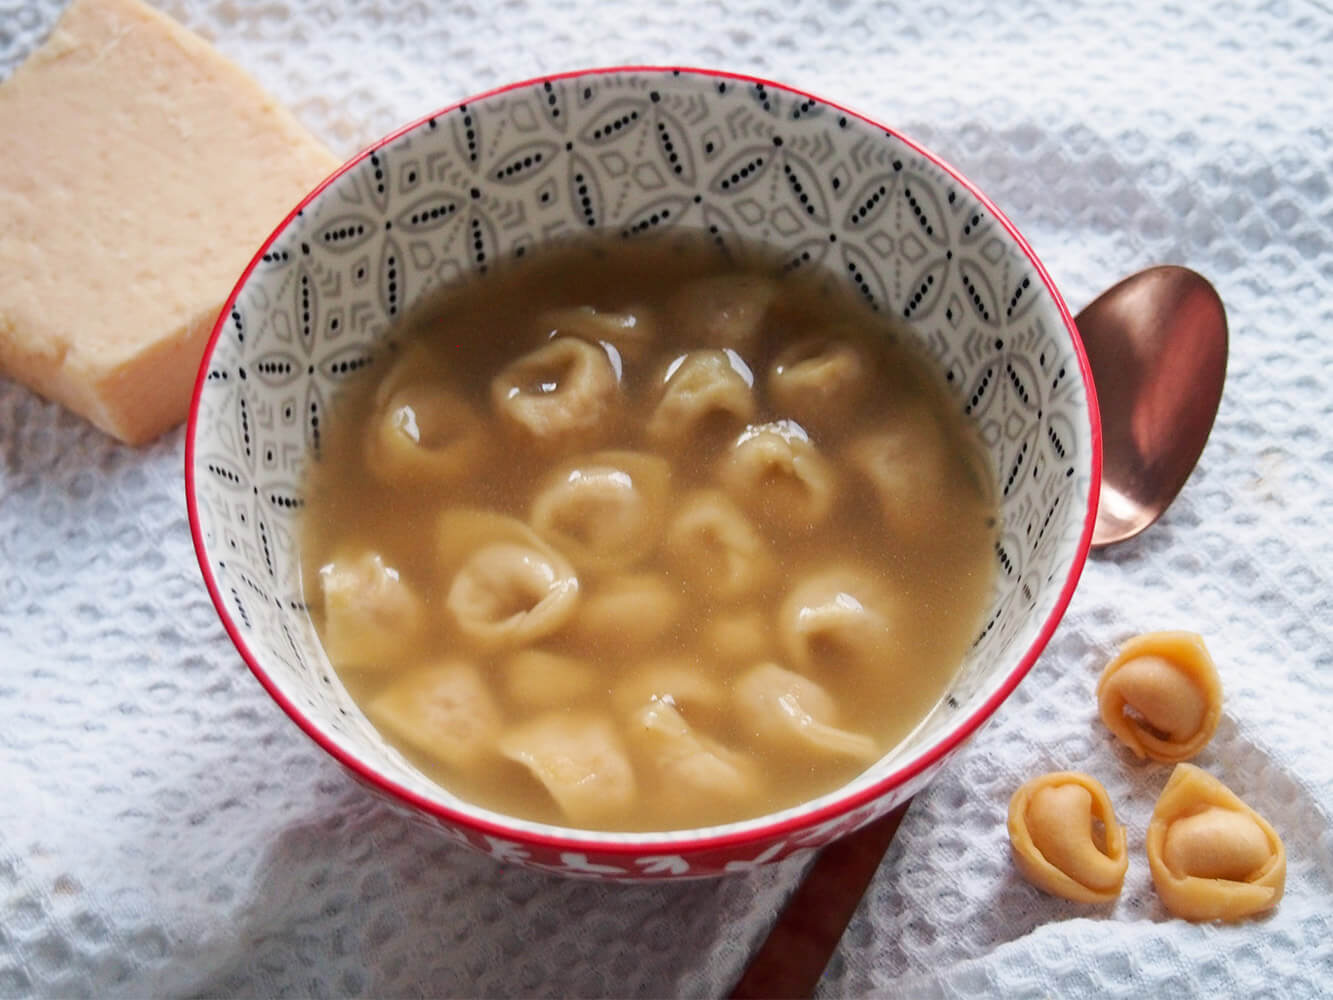 bowl of tortellini in brodo with spoon and additional tortellini to side